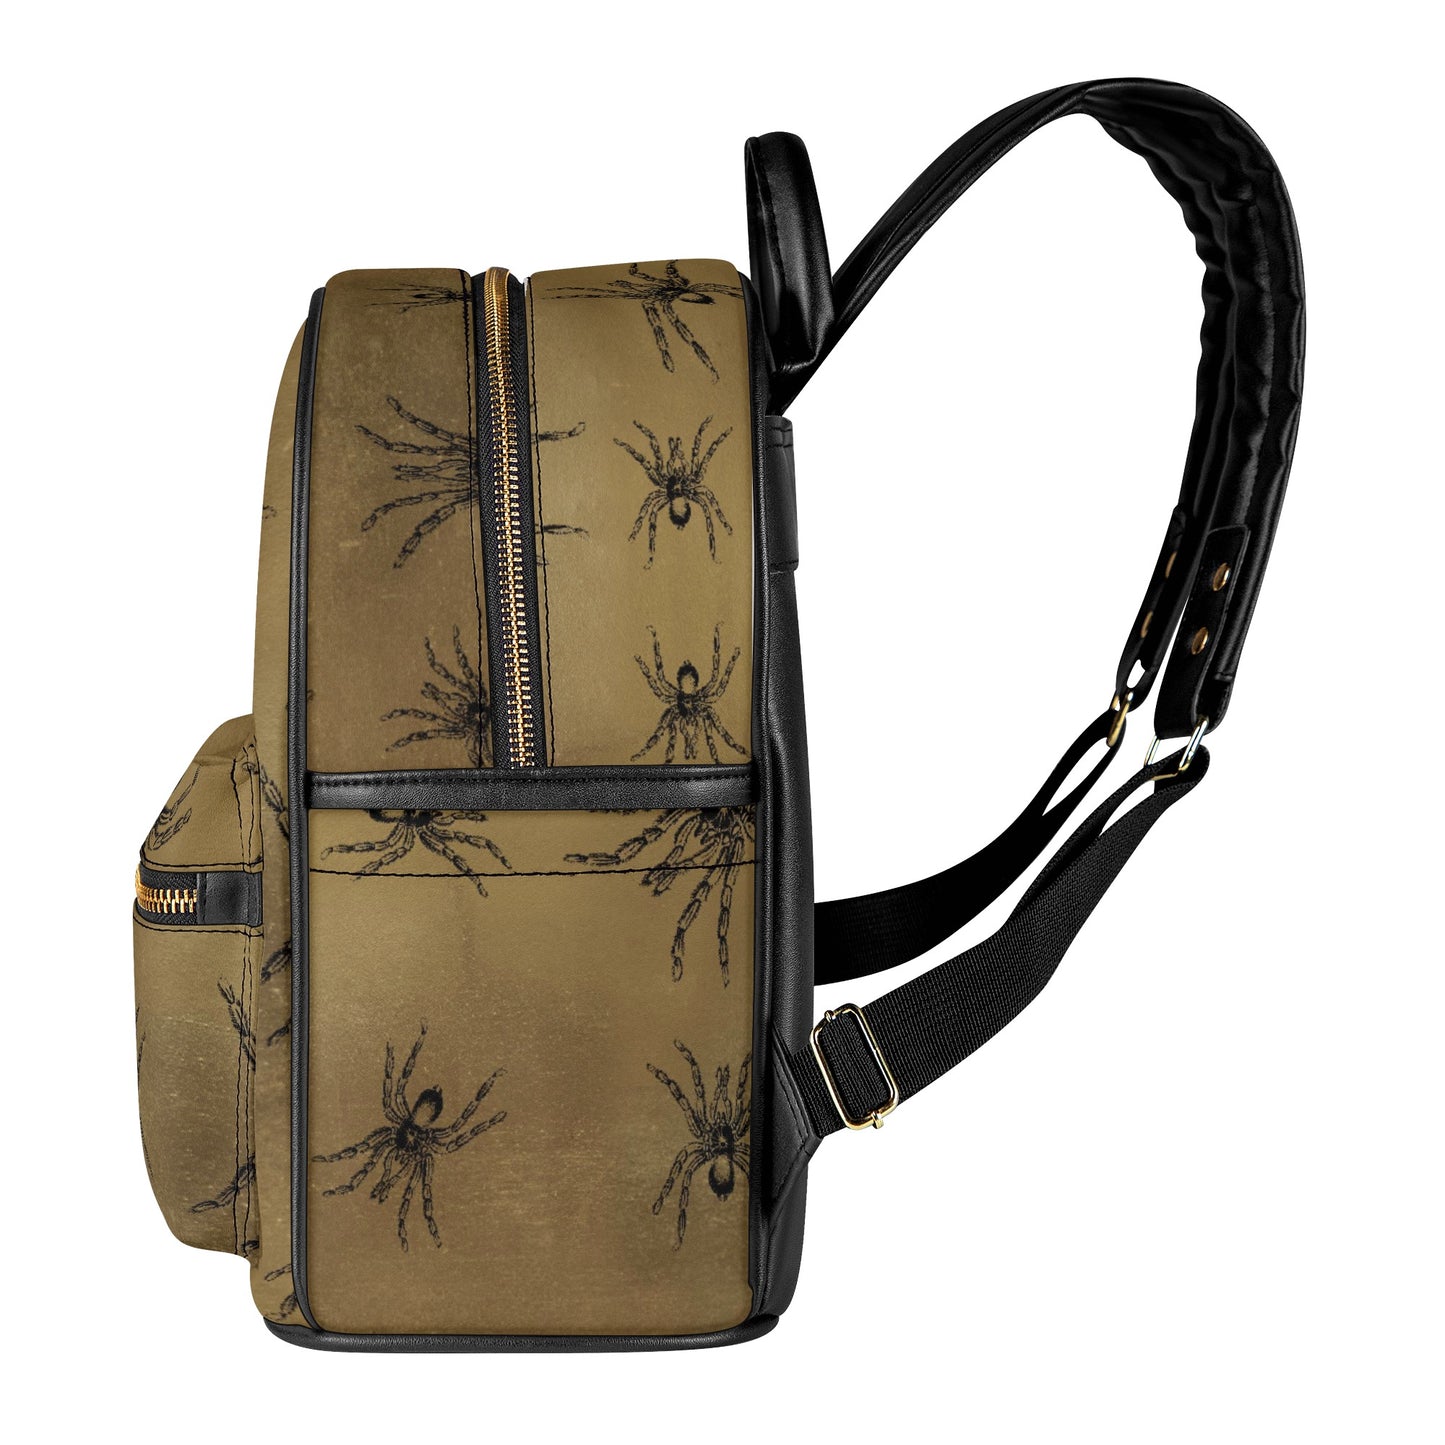 Spider Pattern Casual Backpack